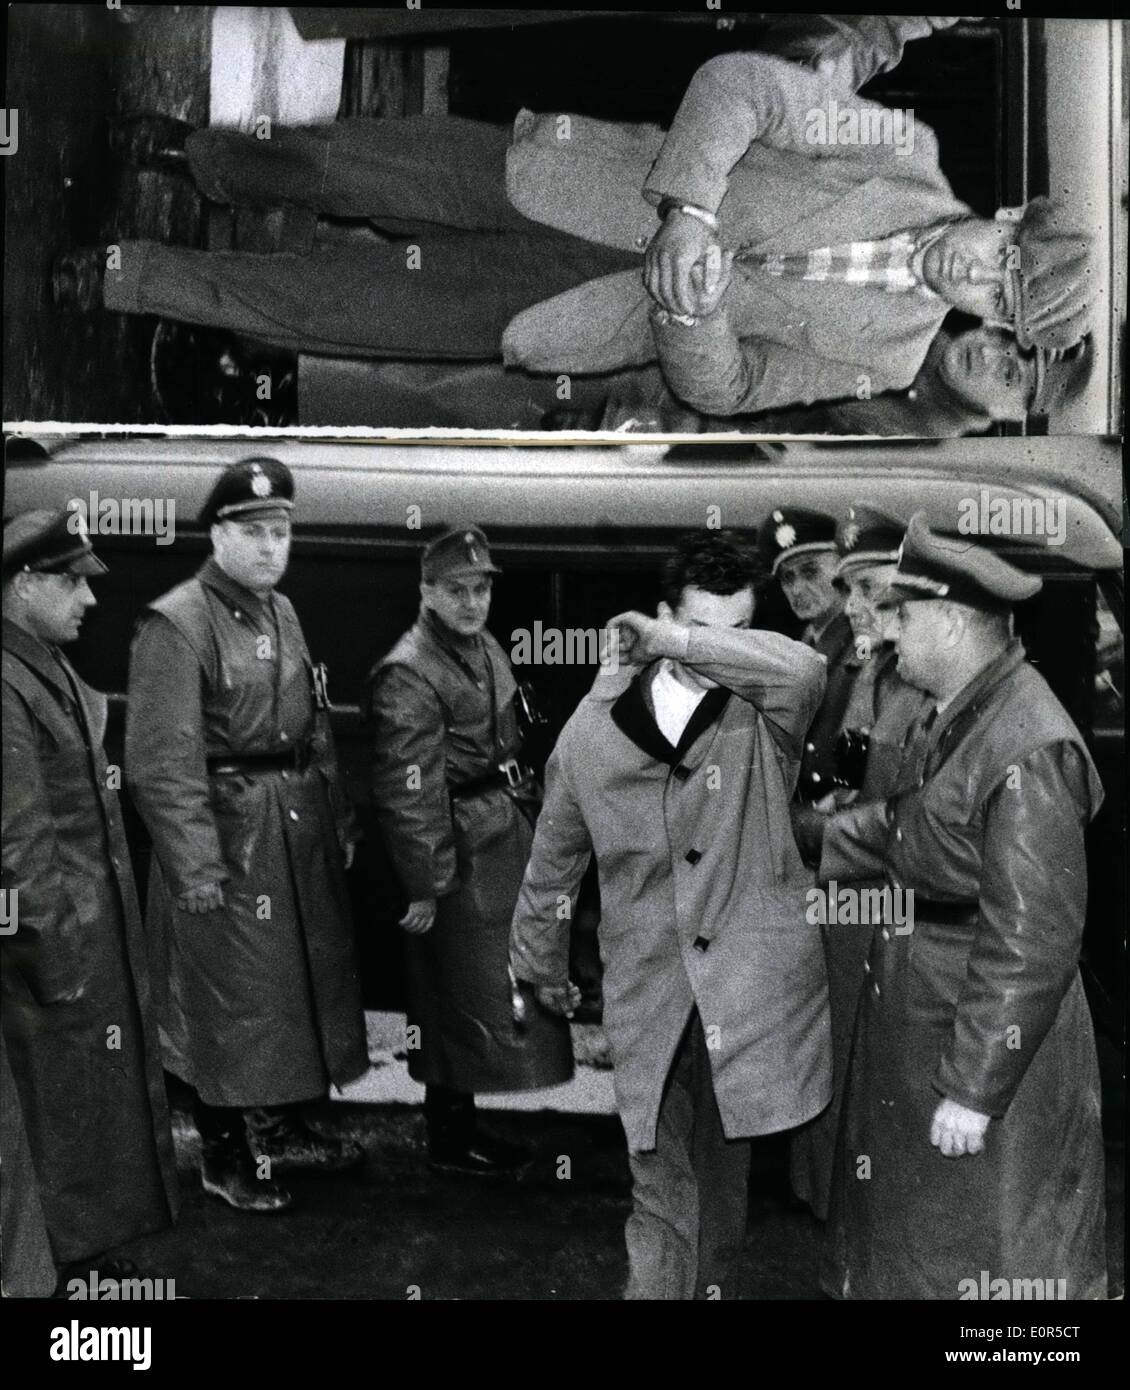 Mar. 03, 1958 - Three of the escaped persons in Wurzburg caught: Because one of the criminals, Brunner, didn't want to walk eleven and half an hour from Warburg to Kassel, he was appealing to the police at the station of Kassel, betraying the number of the stolen car, with which the criminals Gustav Schwarz (GUSTAV SCHWARZ), Manfred Biederer (MANFRED BIEDERER) and Edmund Zahl were trying to escape. Persecution in the districts of Marburg and Frankenberg very soon was leading to the detaining of the three criminals Stock Photo